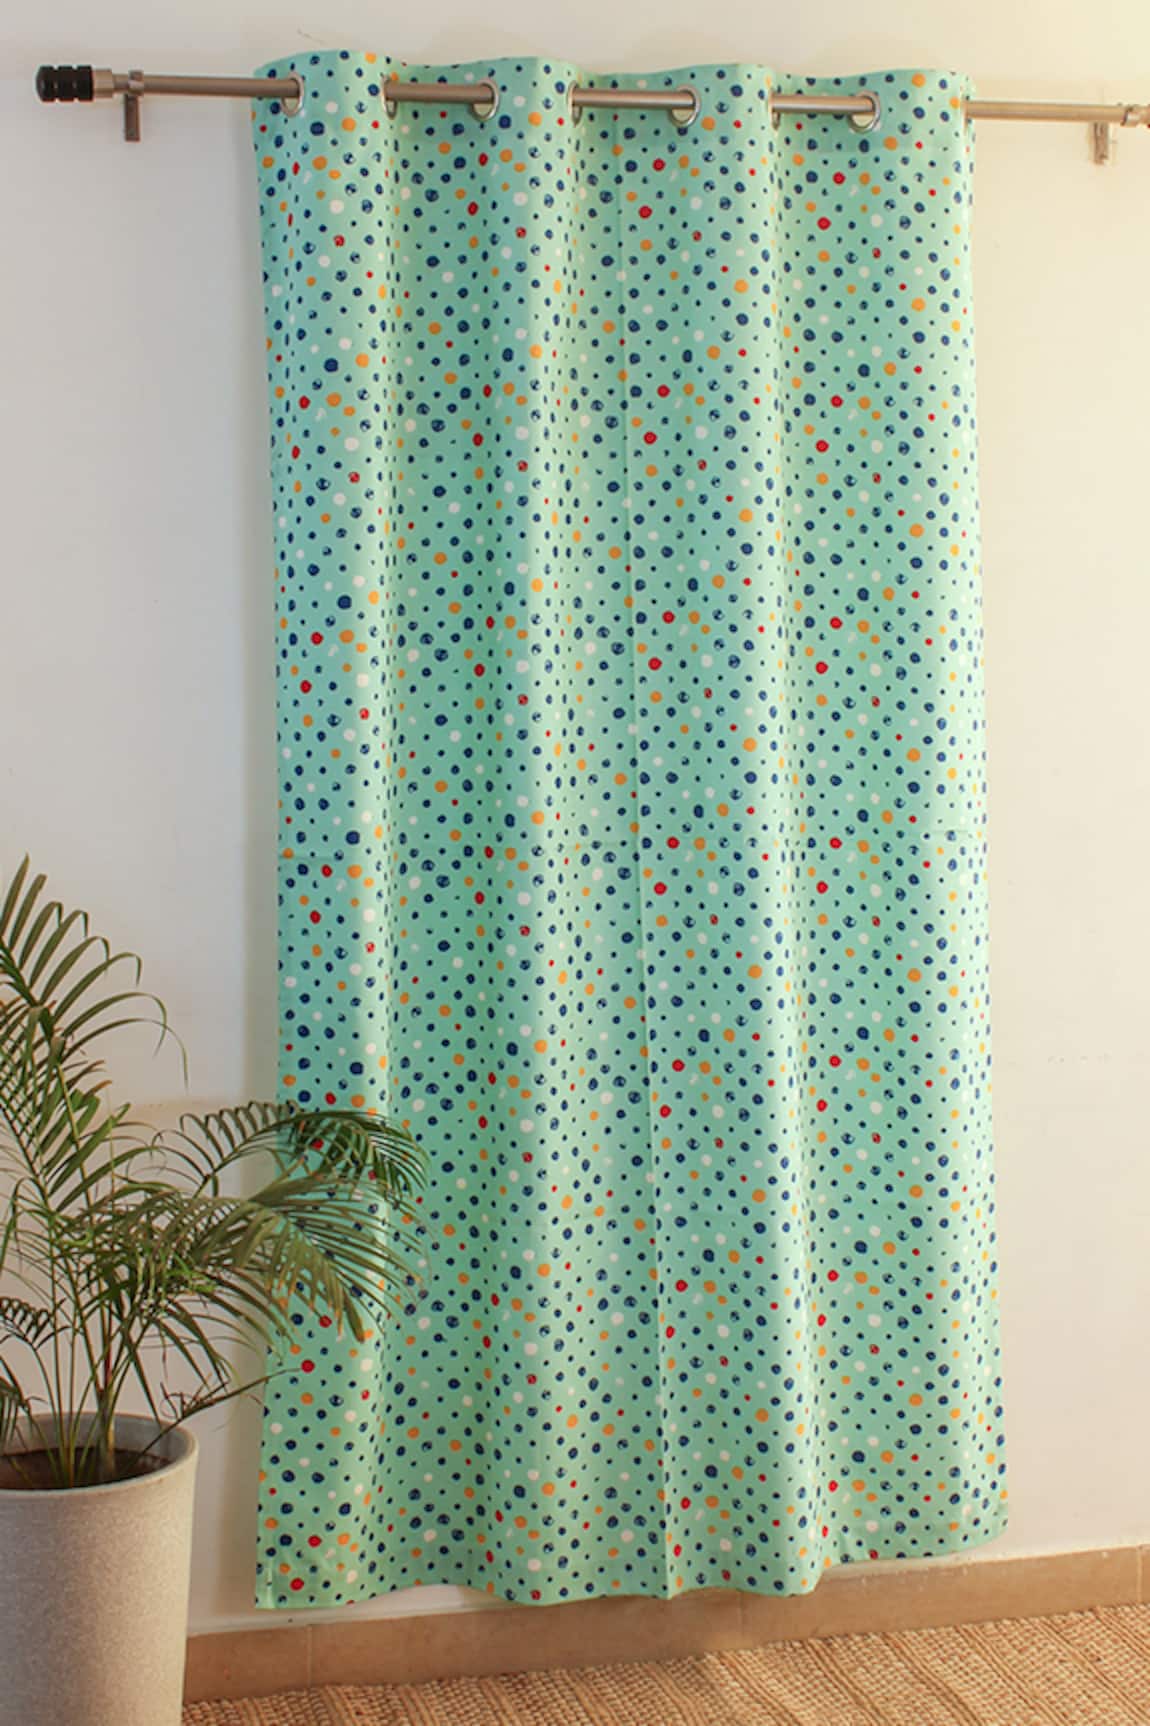 House This Happy Polka Dot Pattern Curtain